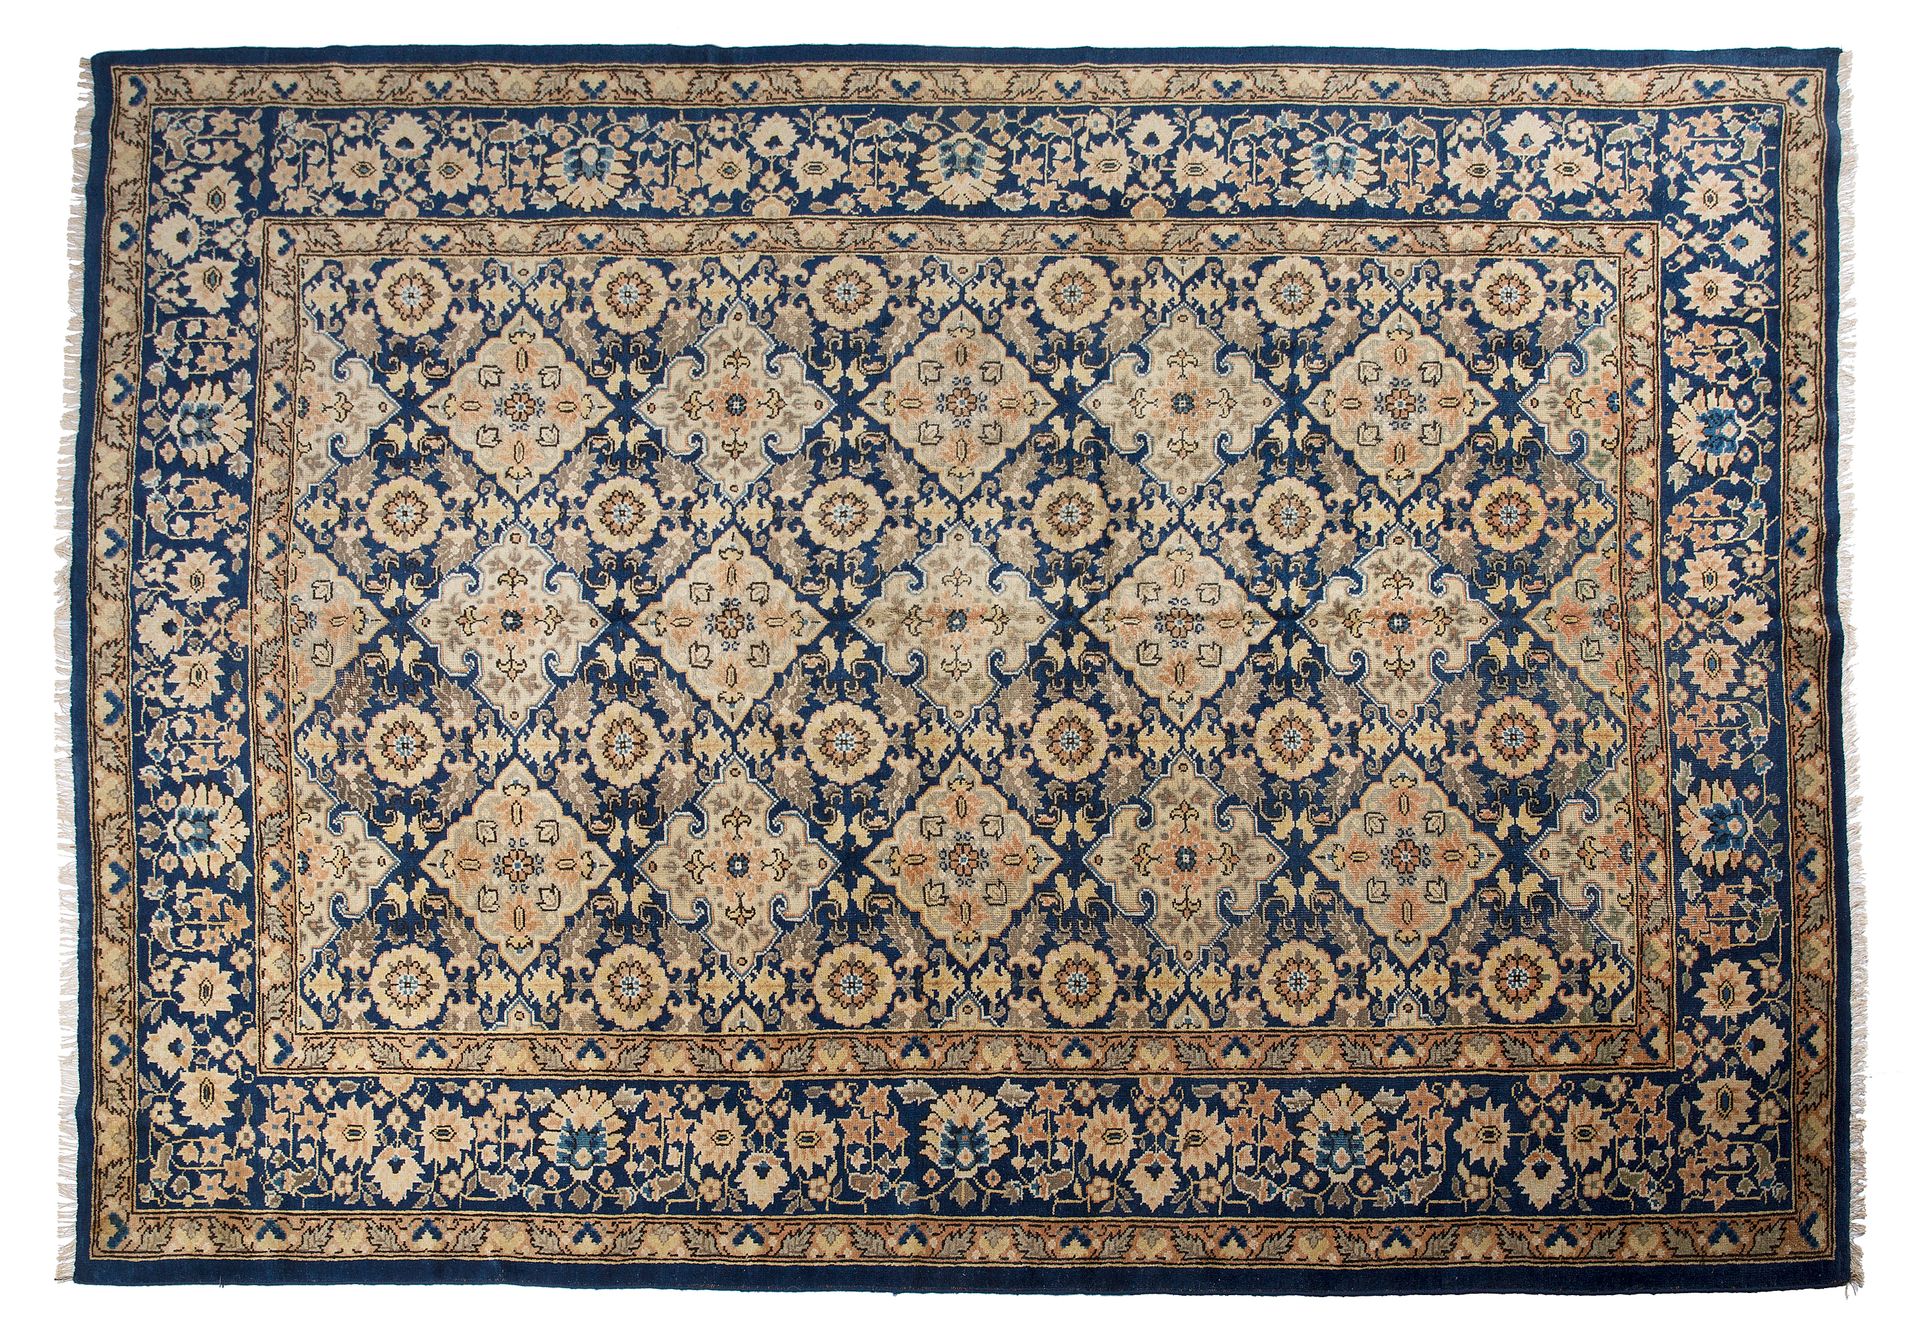 Null YARKAND carpet (Central Asia), late 19th century

Dimensions : 310 x 225cm.&hellip;